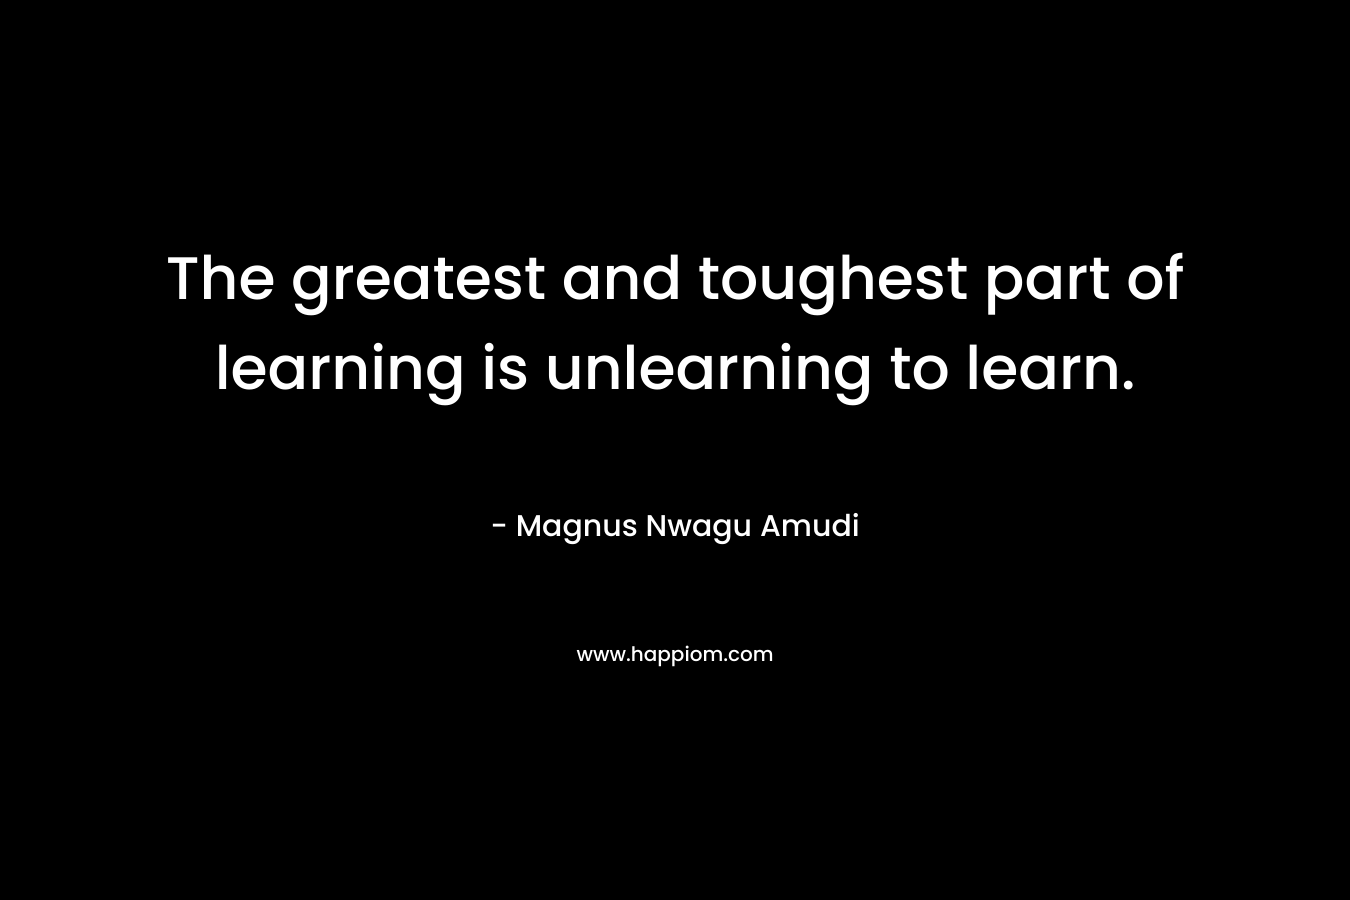 The greatest and toughest part of learning is unlearning to learn. – Magnus Nwagu Amudi